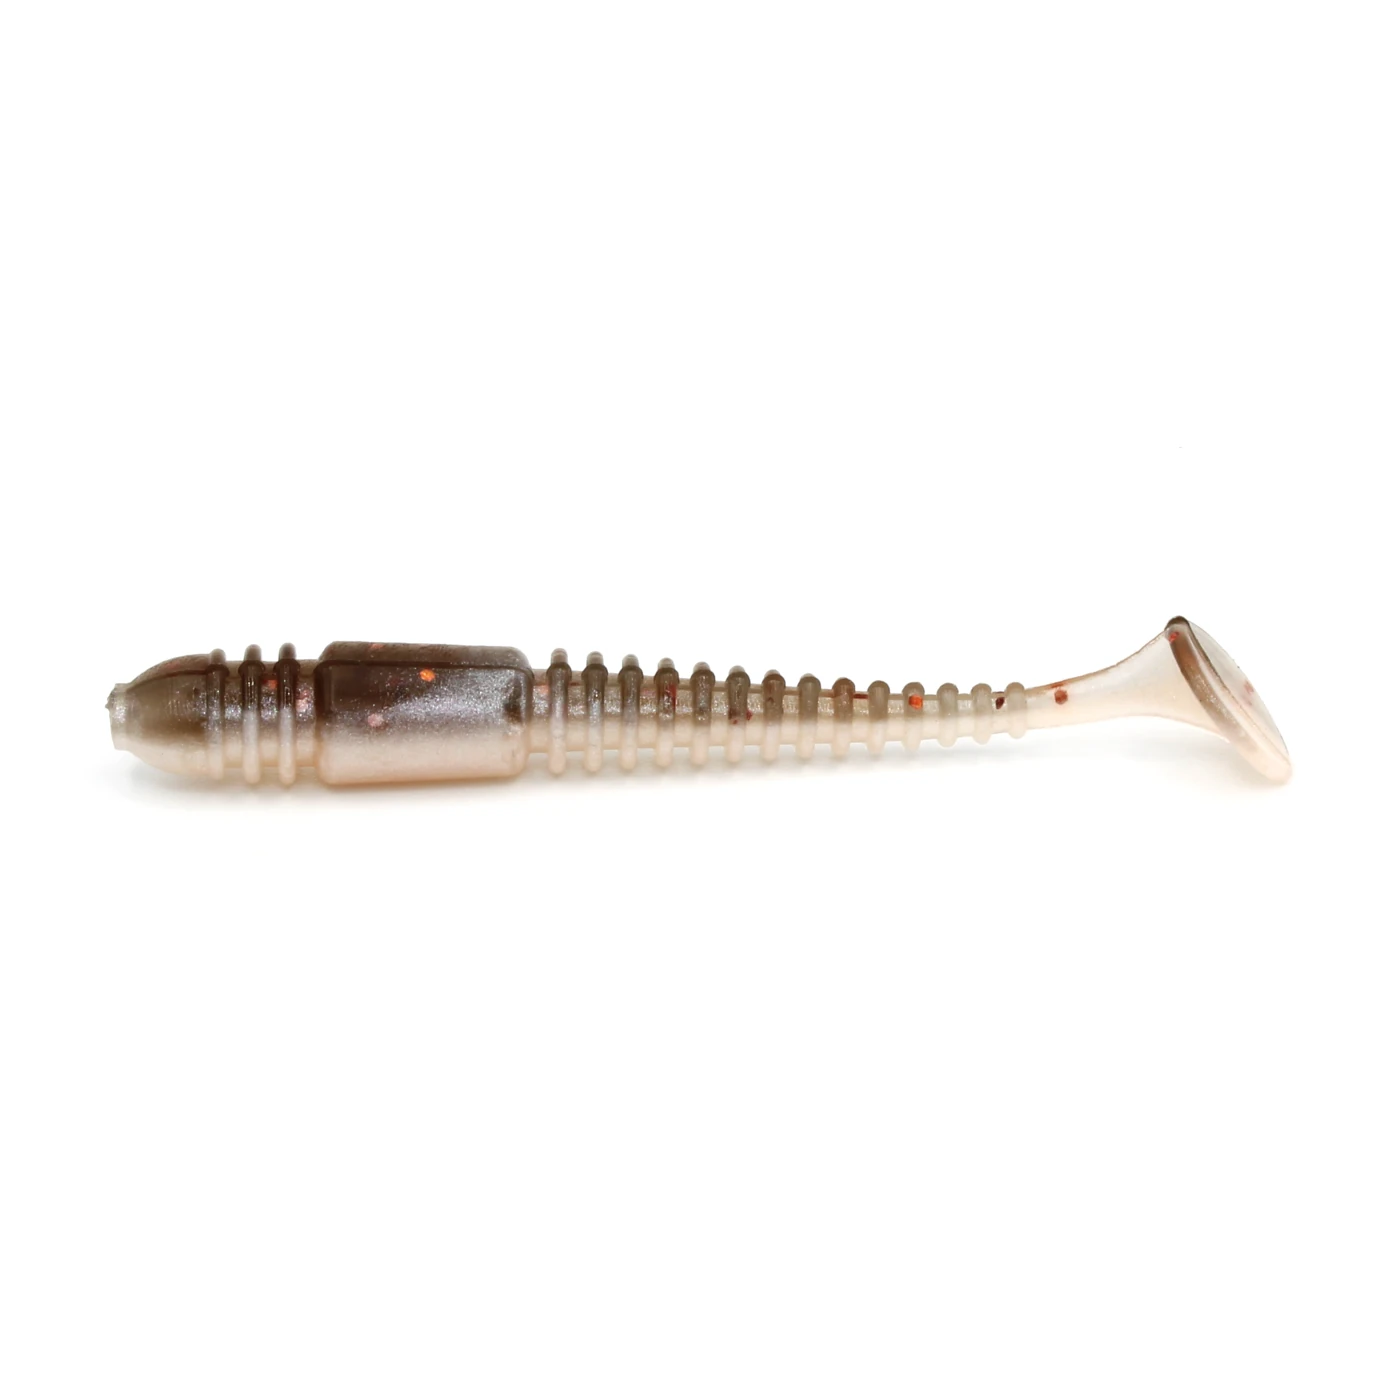 Eurotackle Micro Finesse B-Vibe 2 Swimbait - Bait Finesse Empire